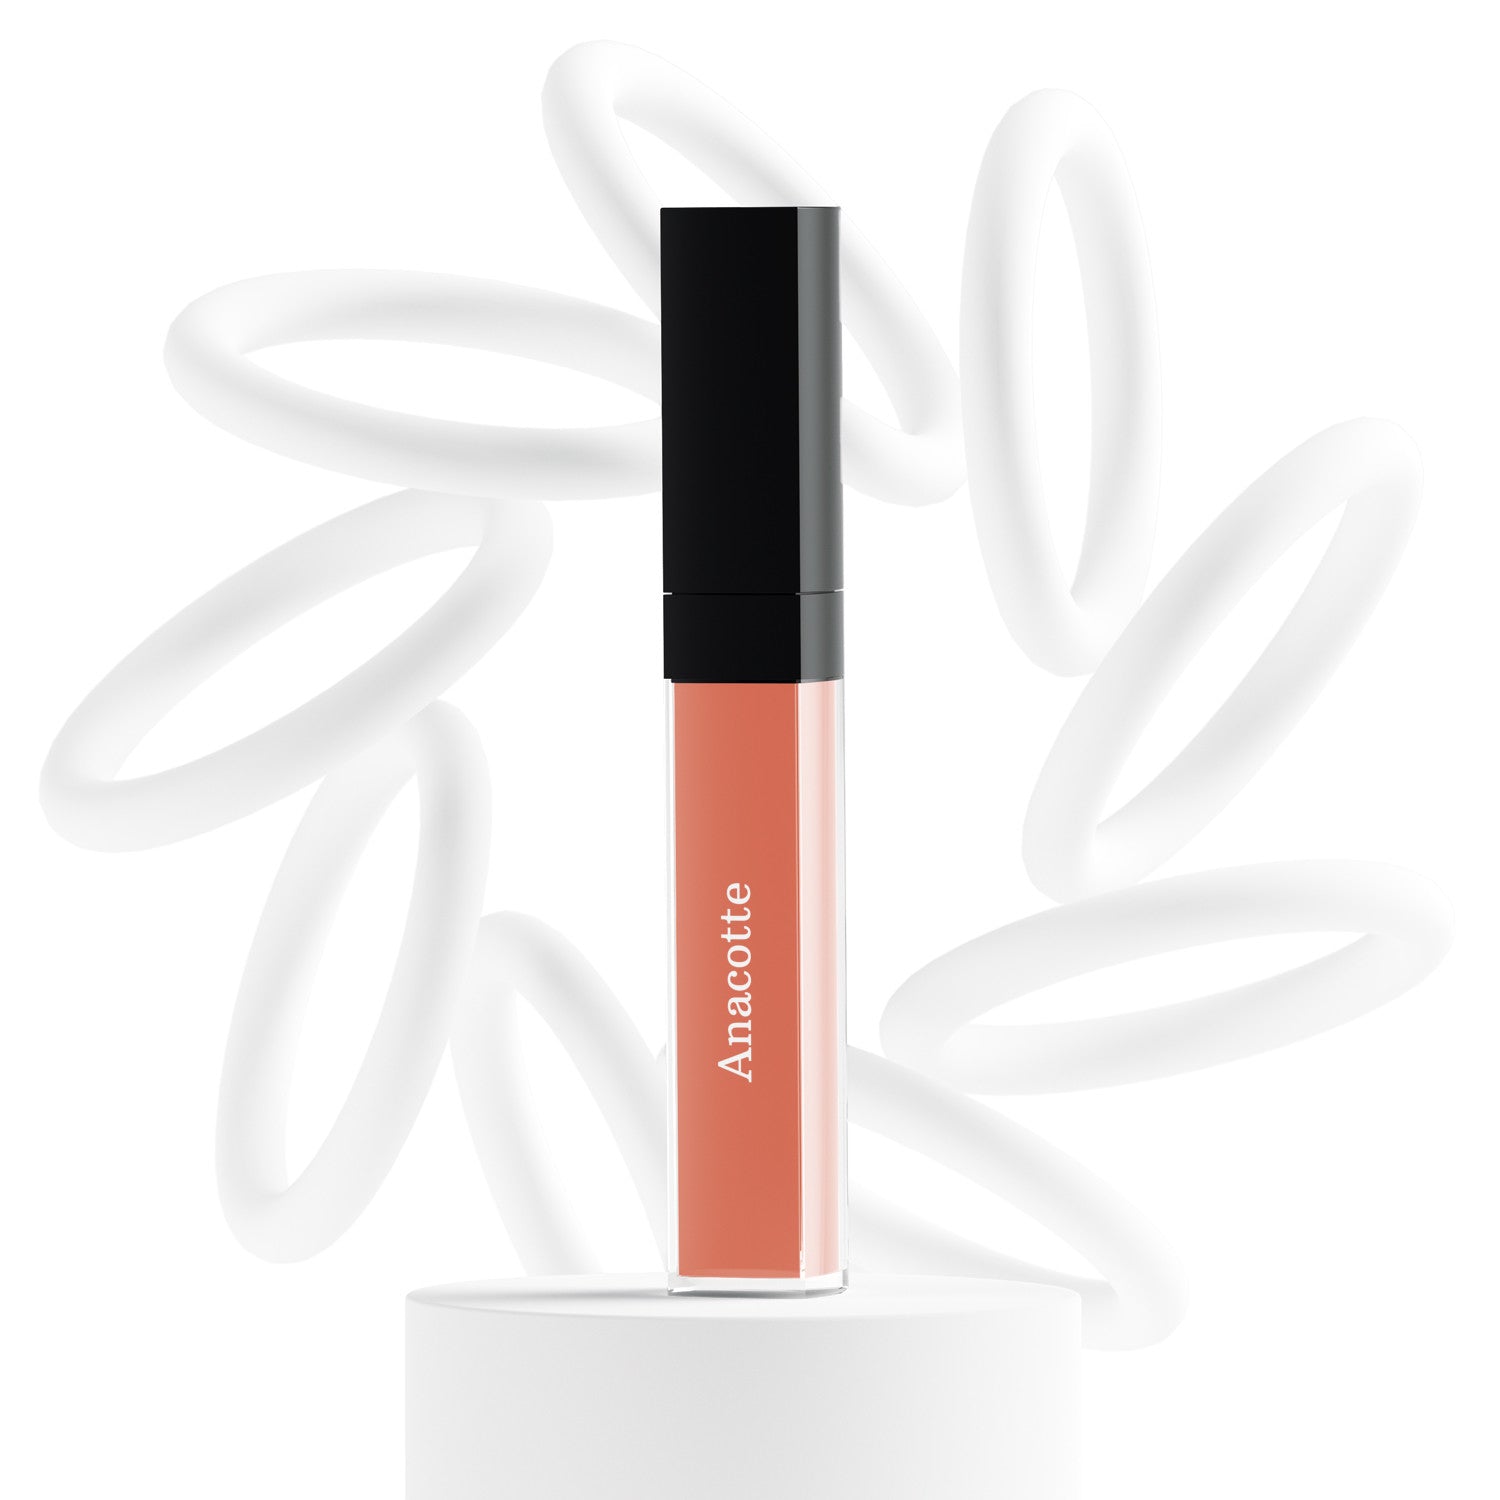 Anacotte's Cruelty-Free Vegan Concealers Light Red